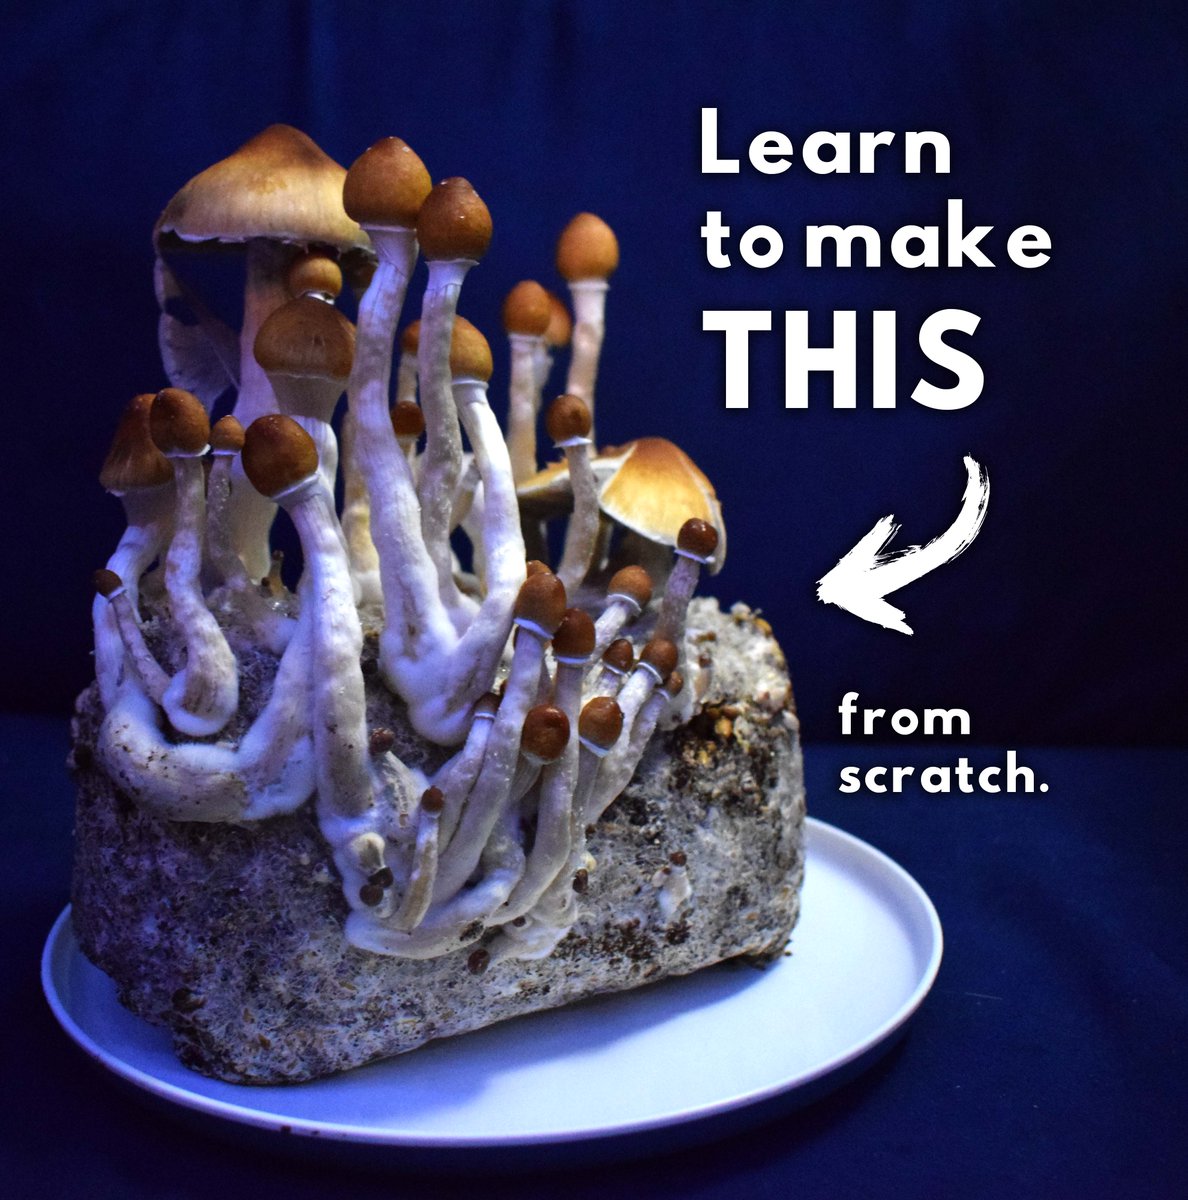 Grab our e-book while it's free 🍄

The full guide on how to grow mushrooms from spores is out and ready for you to learn how to grow magic mushrooms from scratch.

provithor.com/products/unsto…

#magicmushrooms #mushroomgrow #mycology #shrooms #freestuff